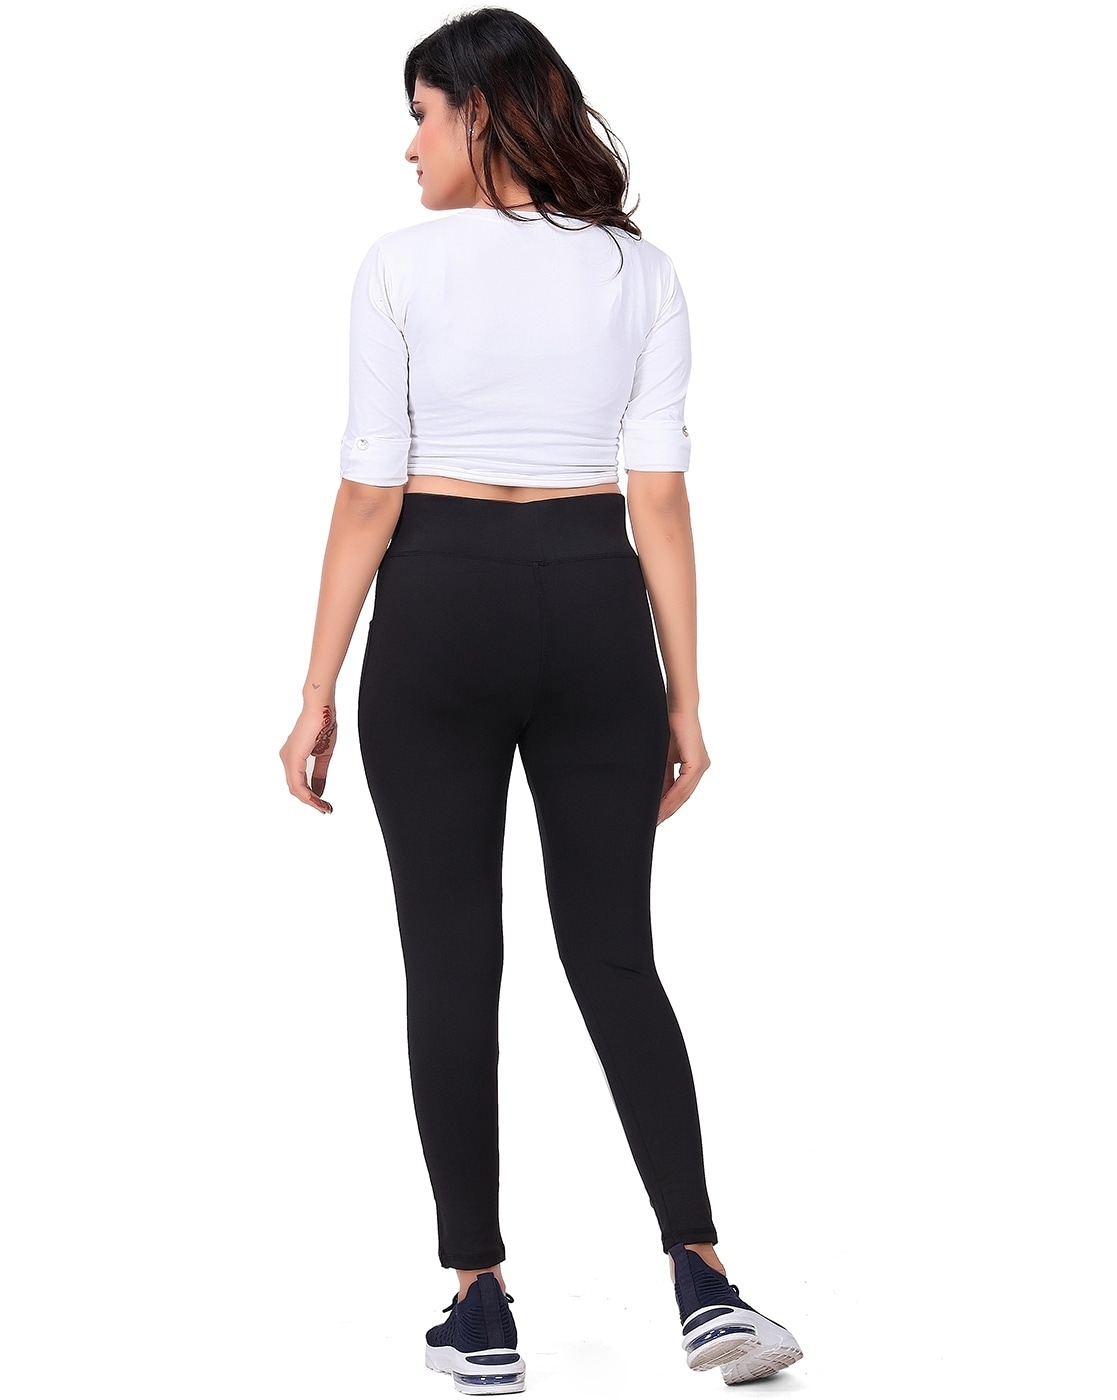 Comfort Lady Ankle Length Leggings Size-Free Col-052,Black in Rajkot at  best price by Satyam Textile - Justdial